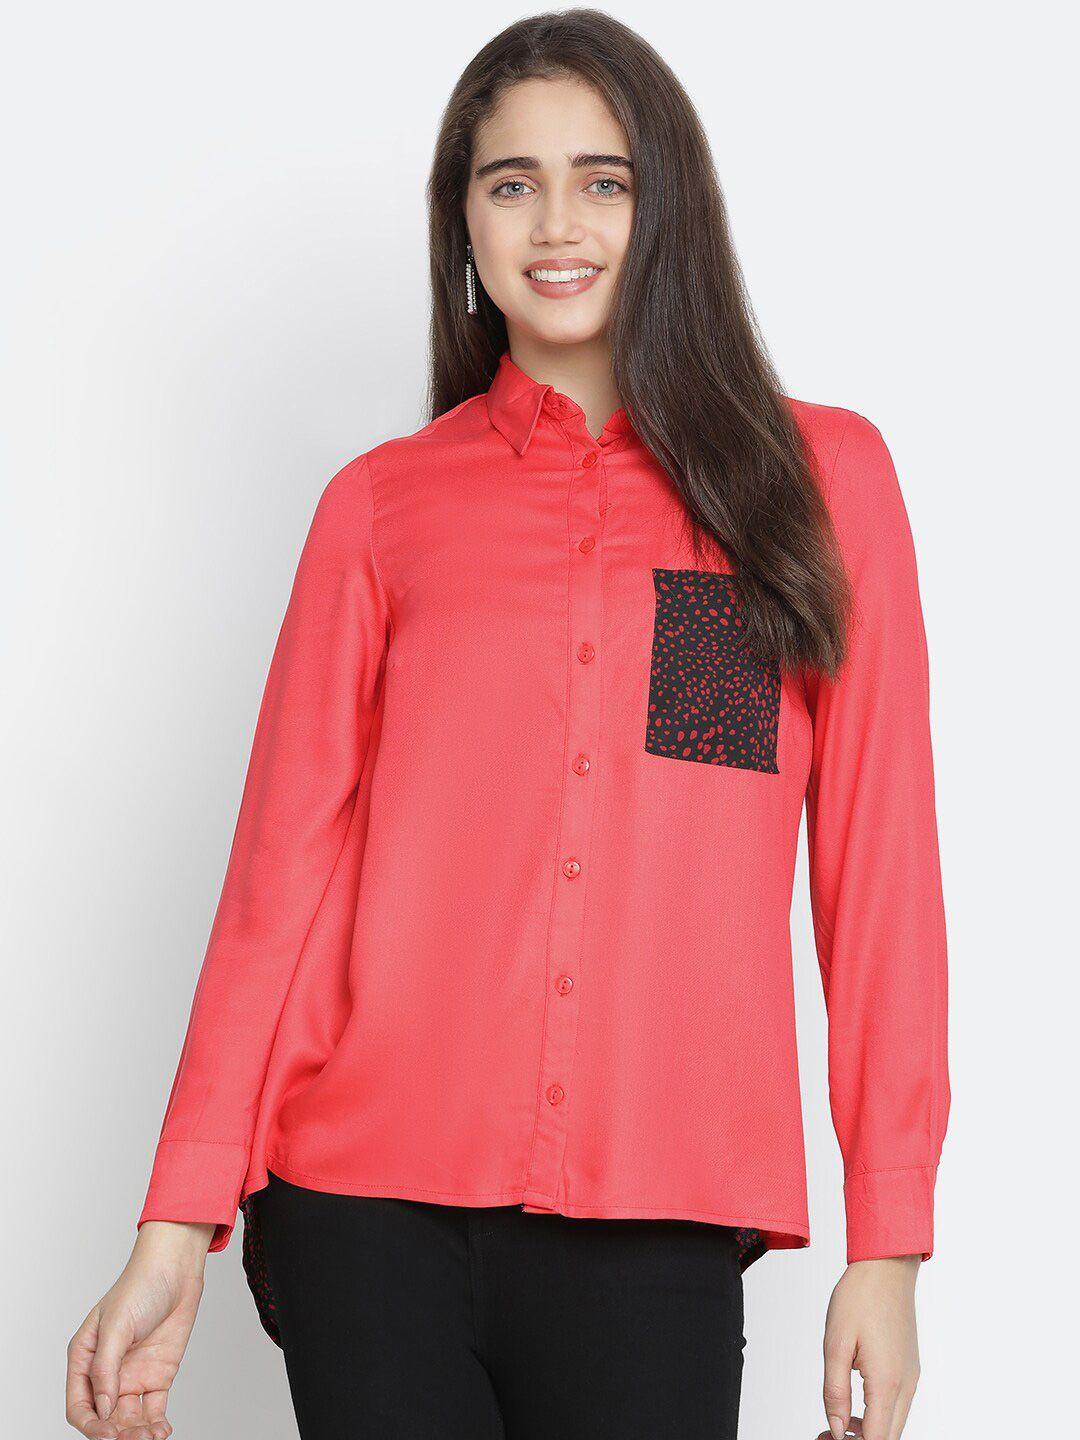 oxolloxo women red & black printed casual shirt